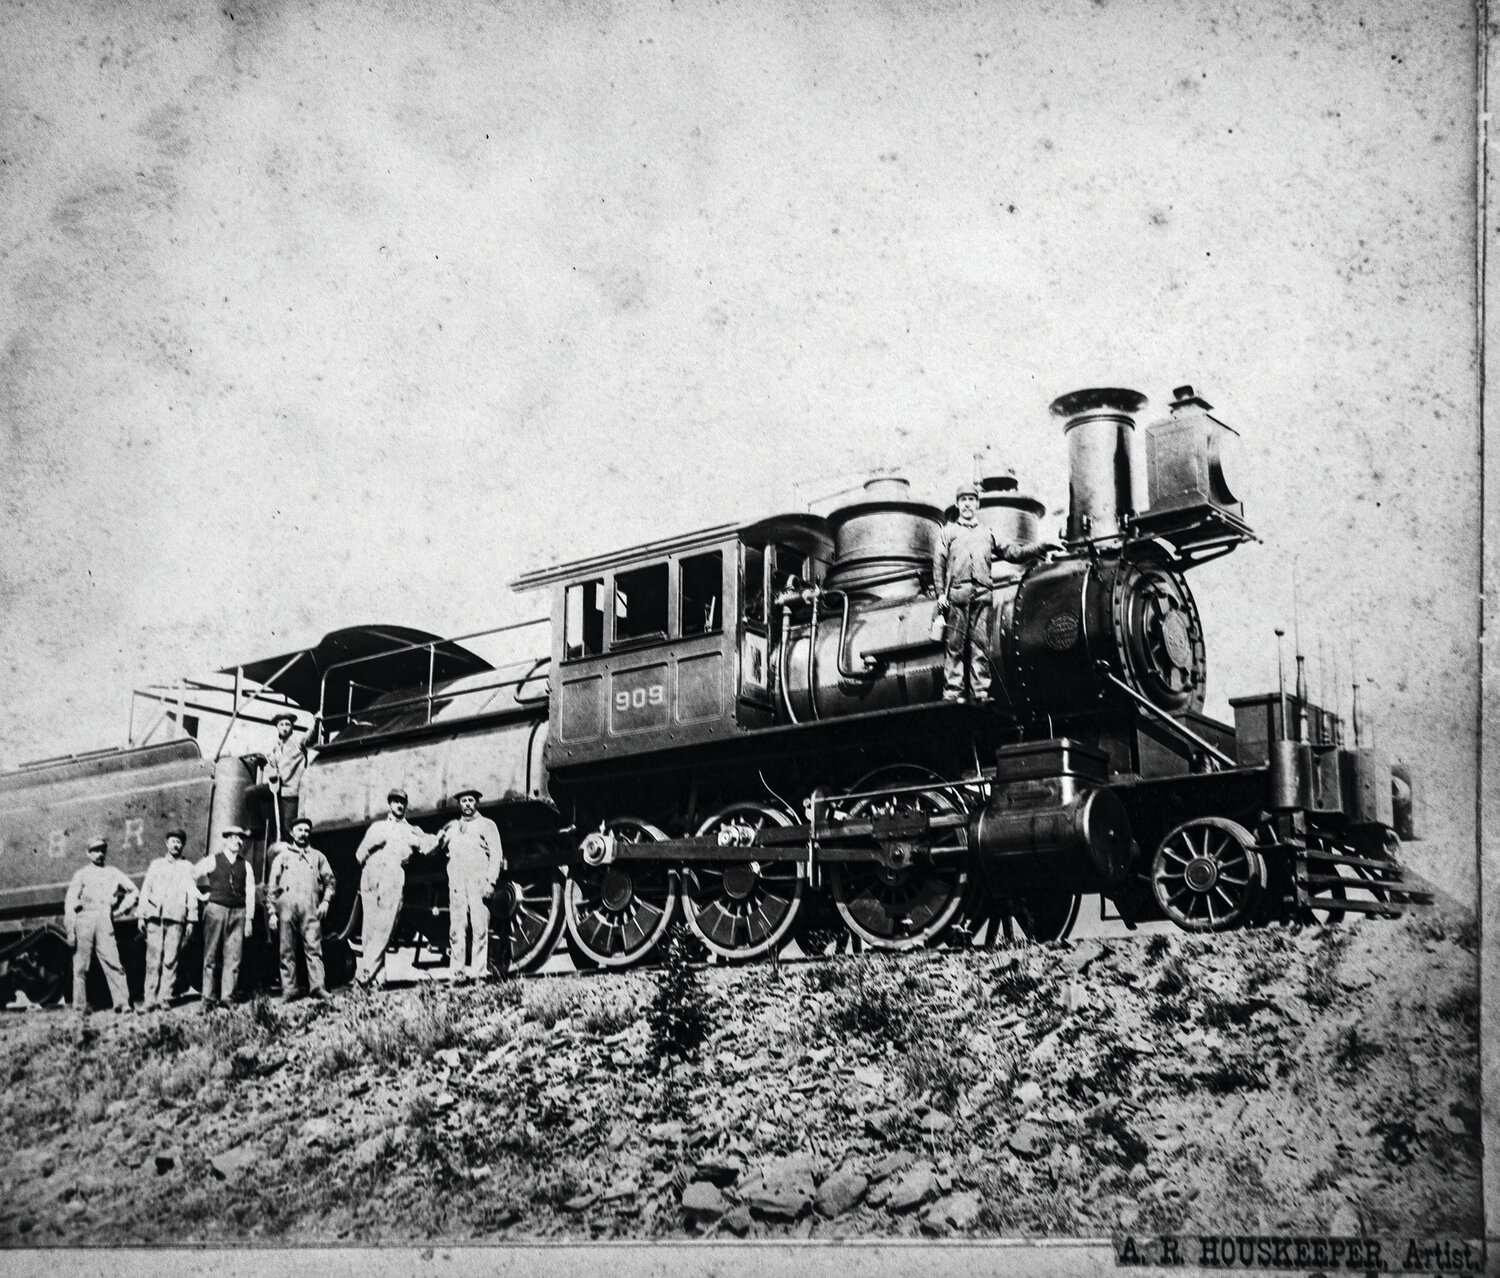 The first trains rolled into Perkasie in late 1856 though this photo is dated 1888.